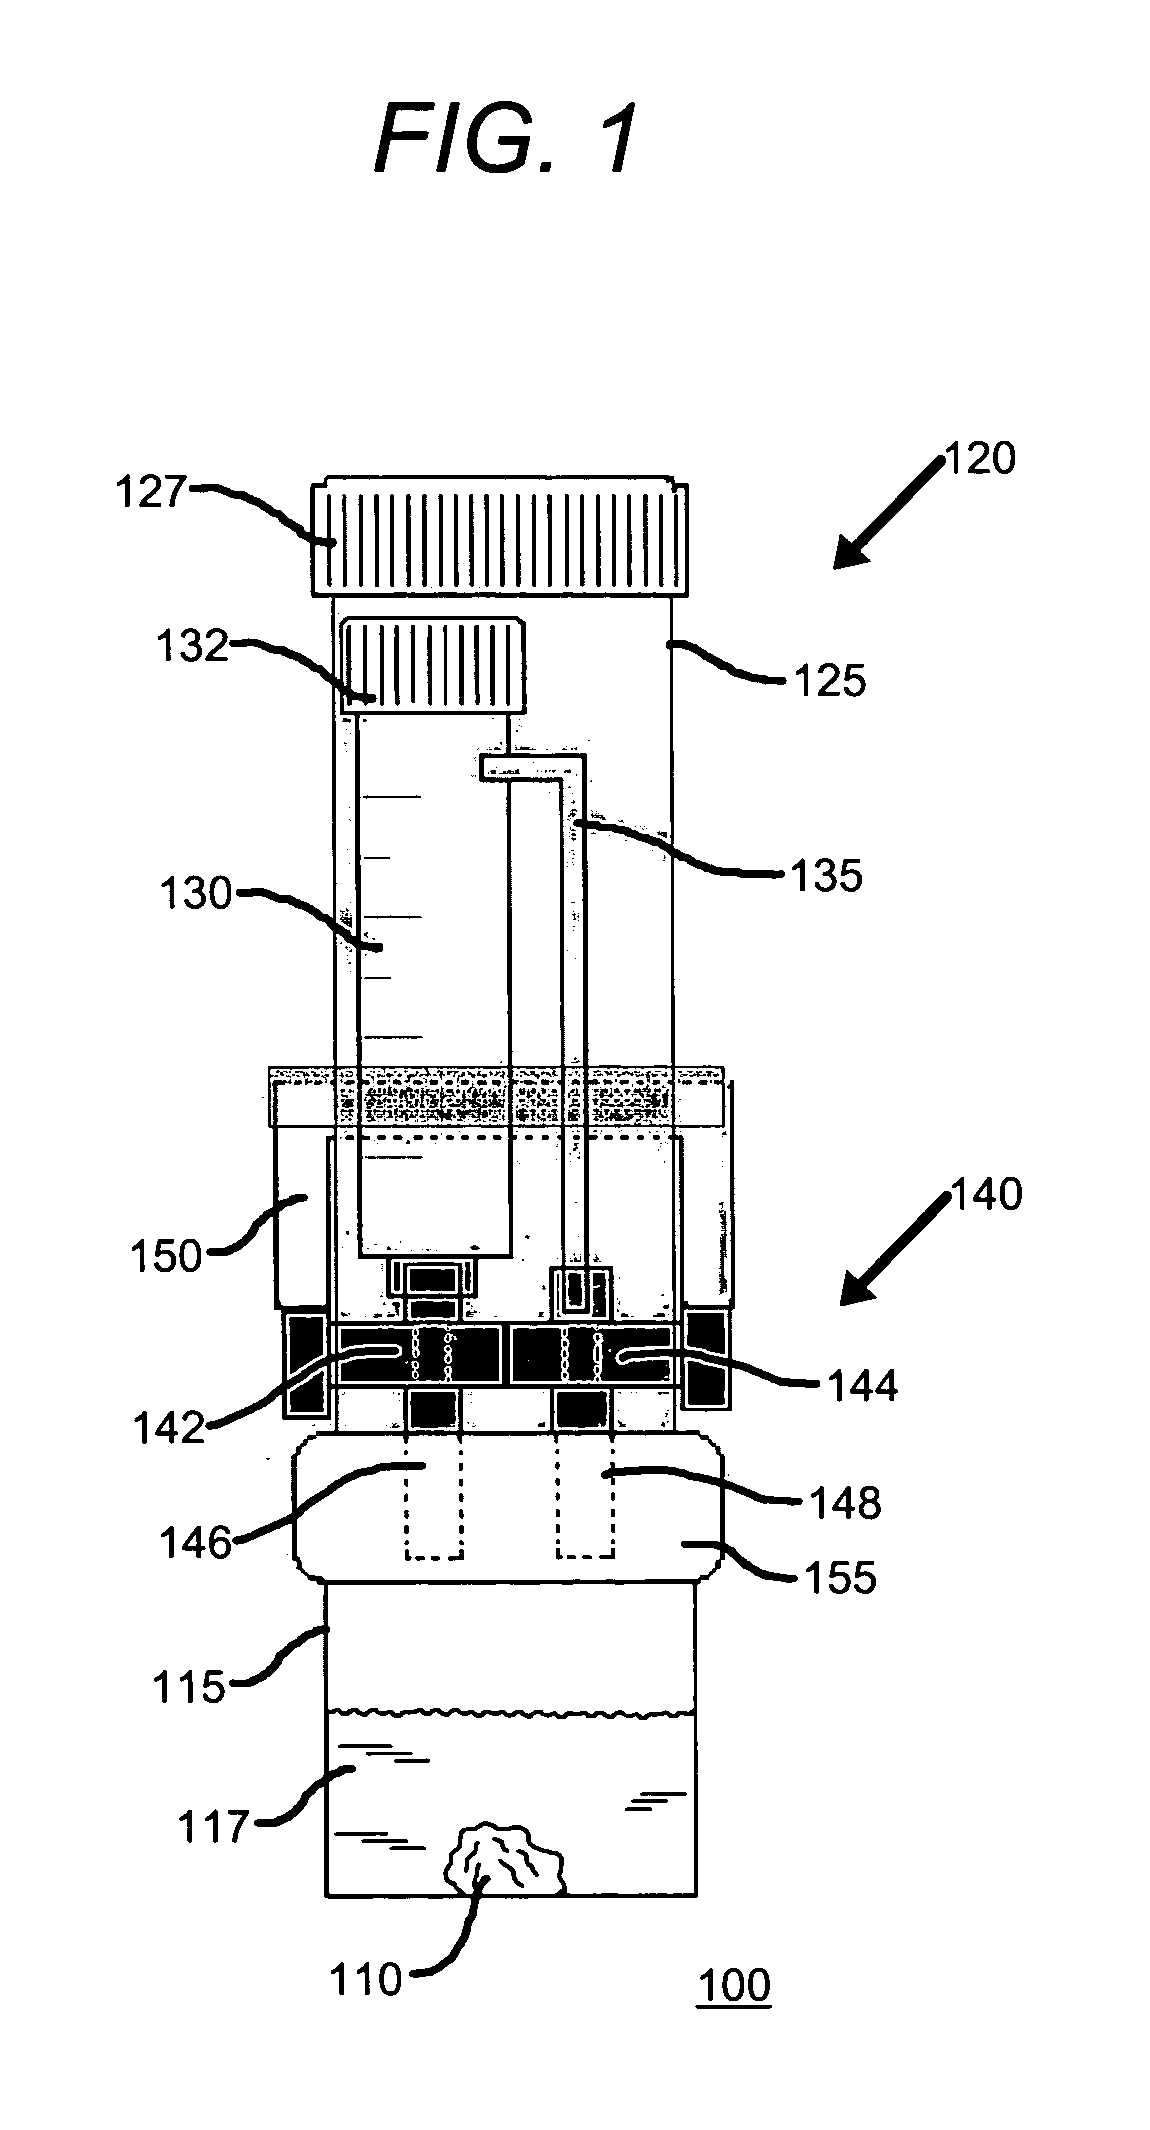 Device for collection and preservation of tissue or stool samples